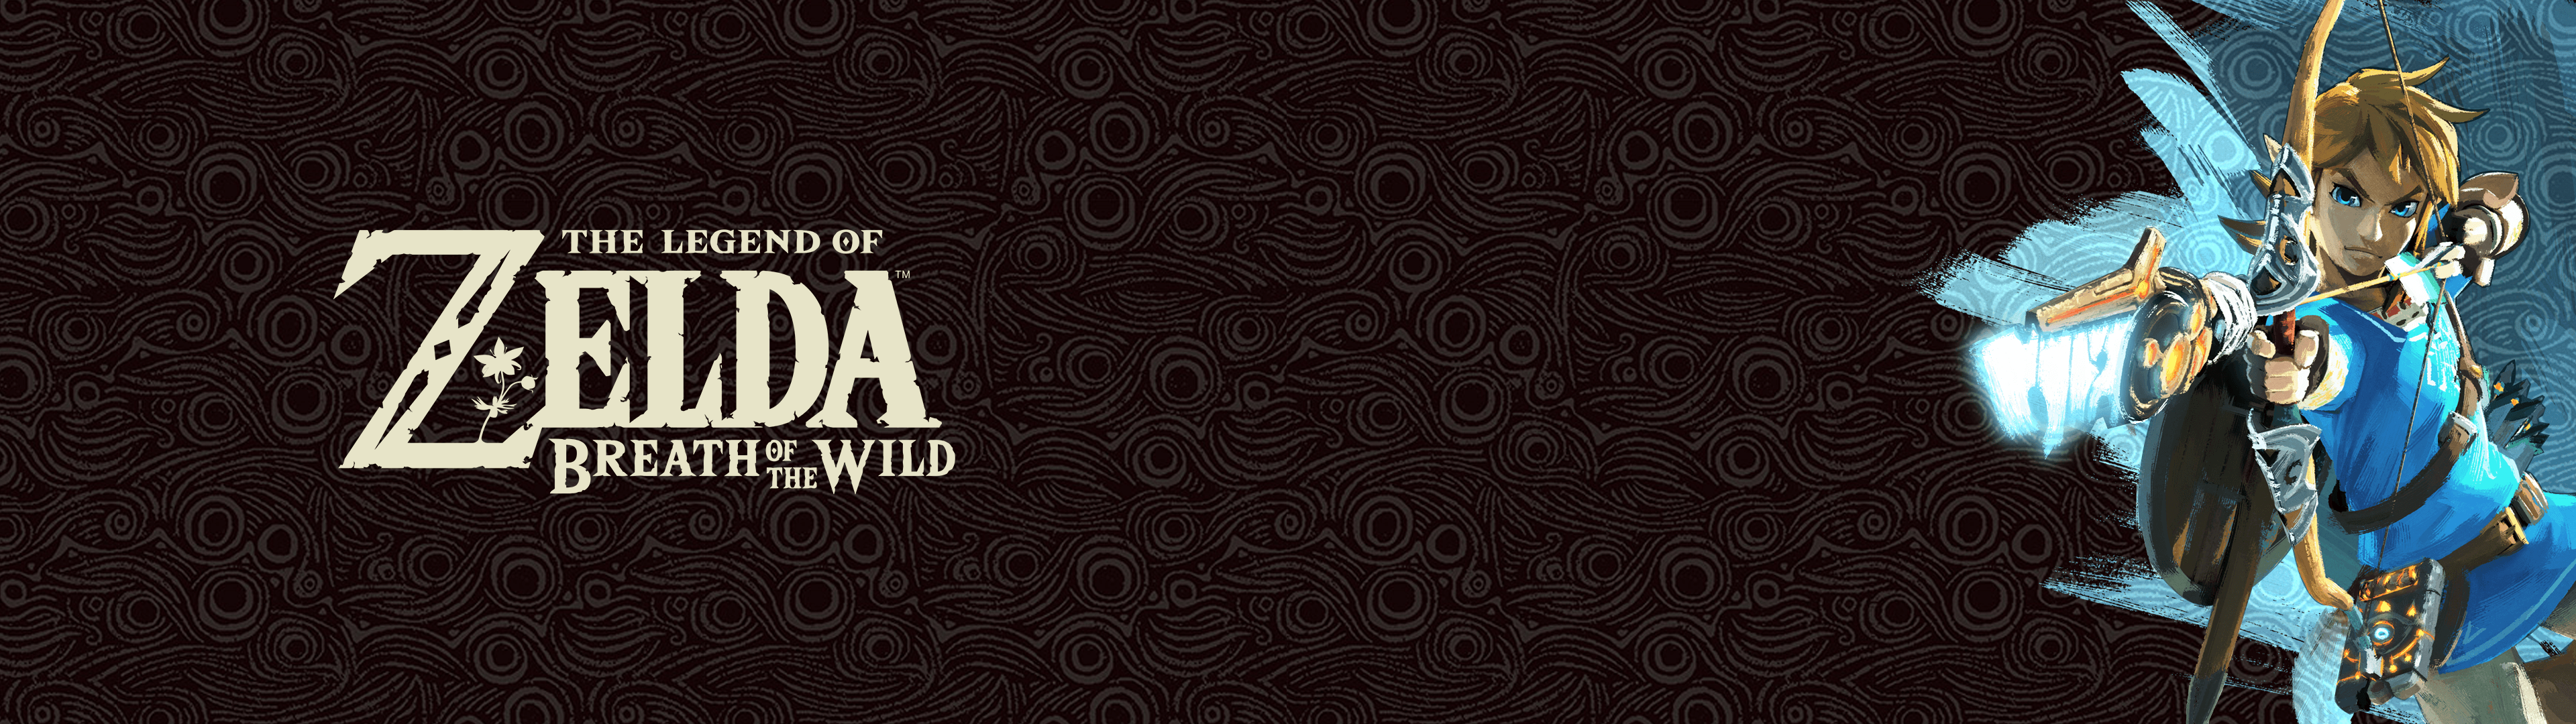 High Quality Breath of the Wild Dual Monitor Wallpaper I put